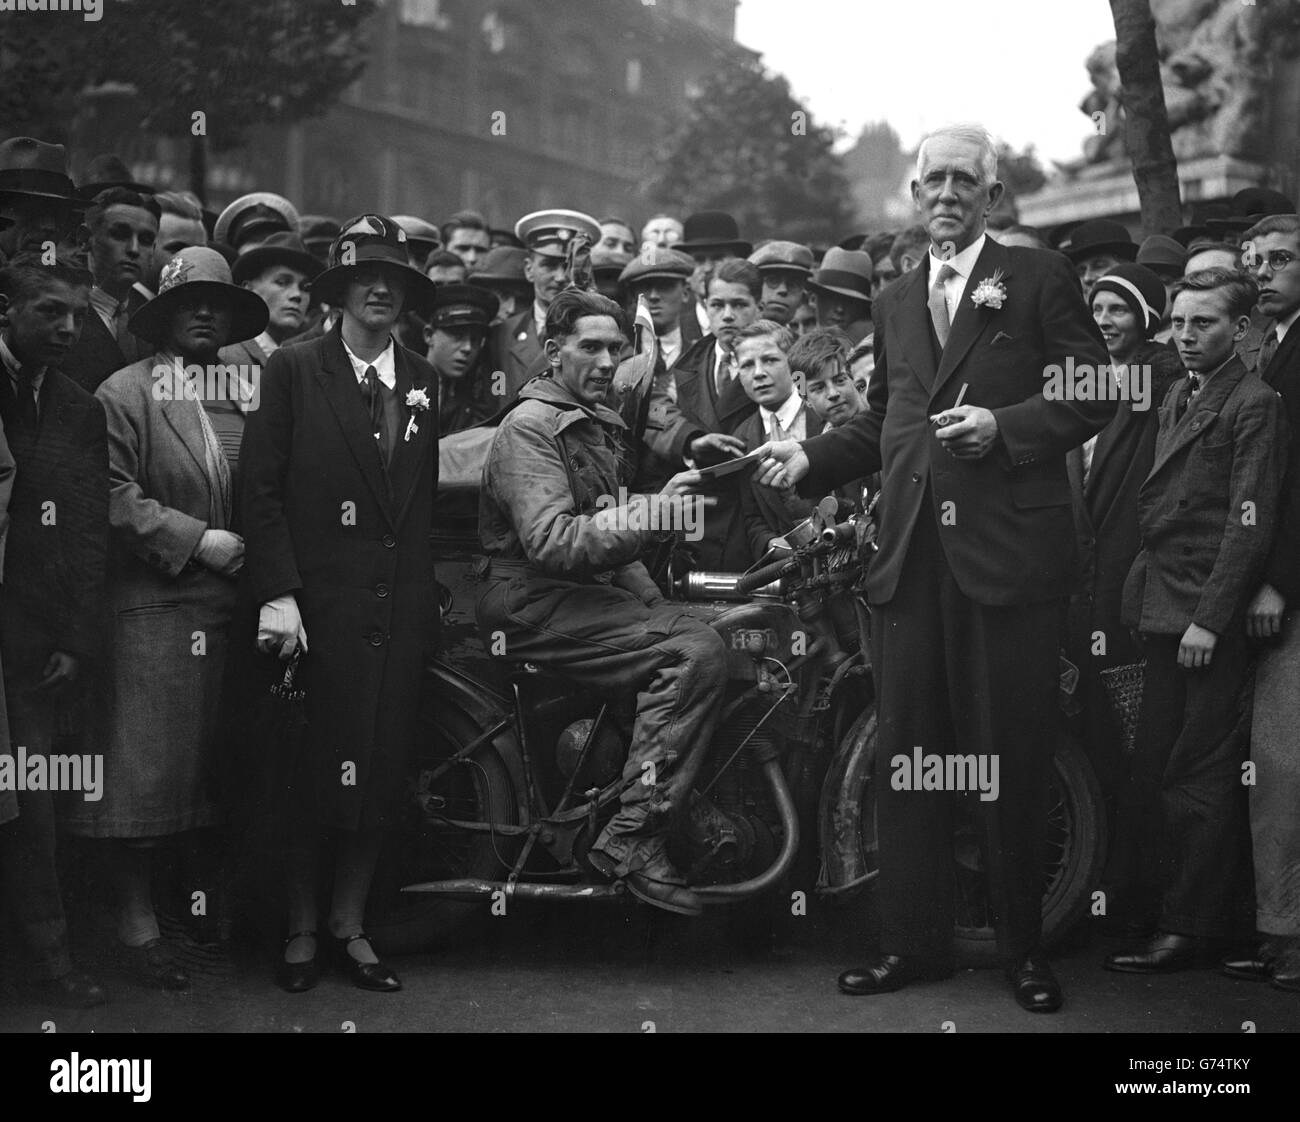 London motorcyclist John Gill arrives at Australia House to deliver a letter to F Trumble from the Australian premier. Gill has ridden across Europe and Asia on his journey to Australia. Stock Photo